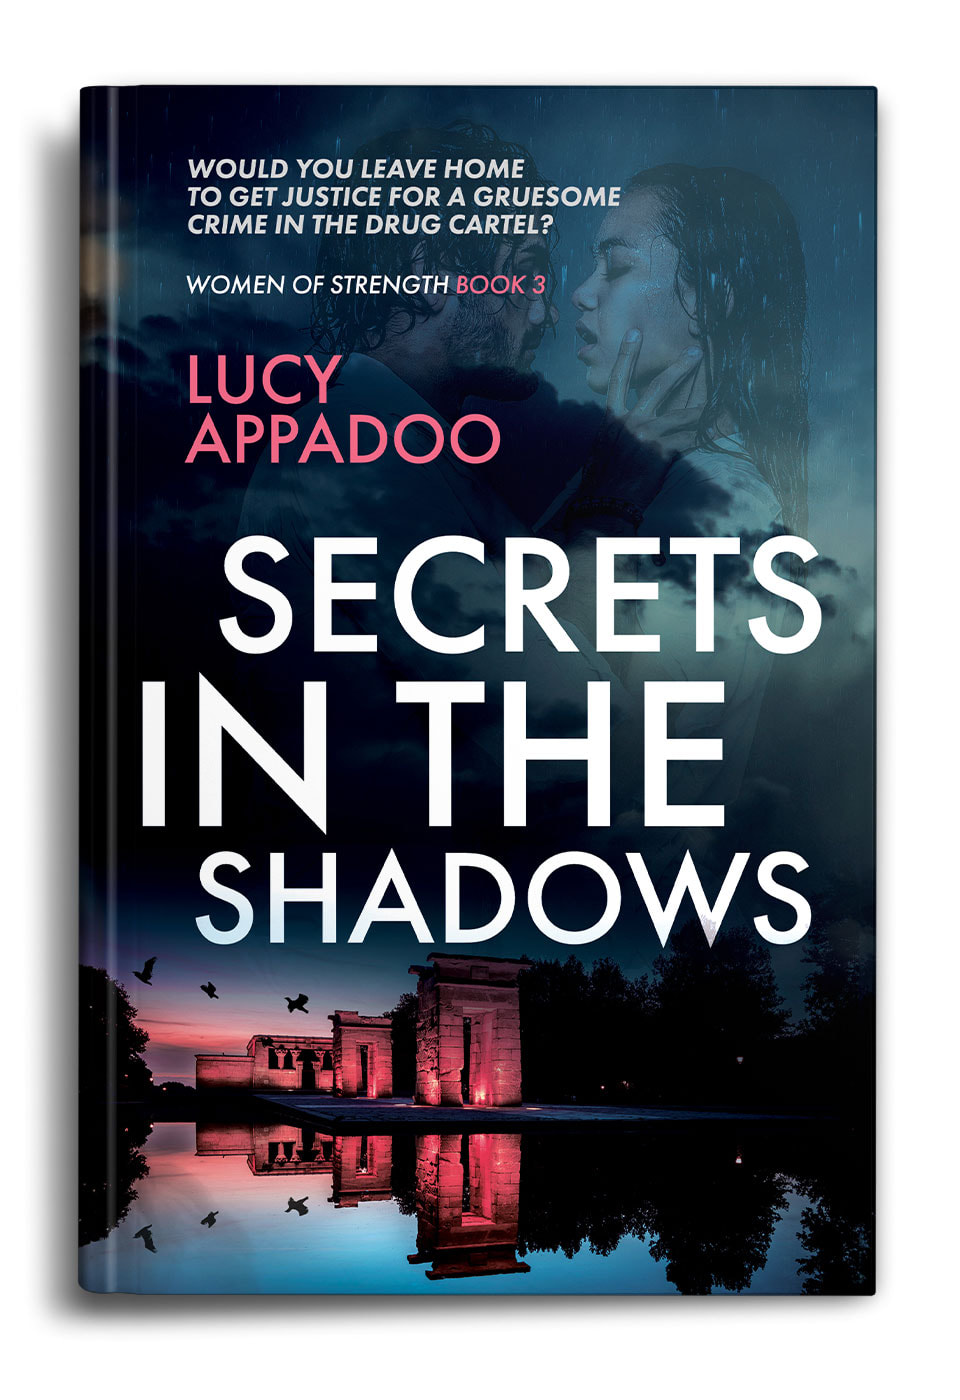 Secrets-in-the-Shadows-by-Lucy-Appadoo